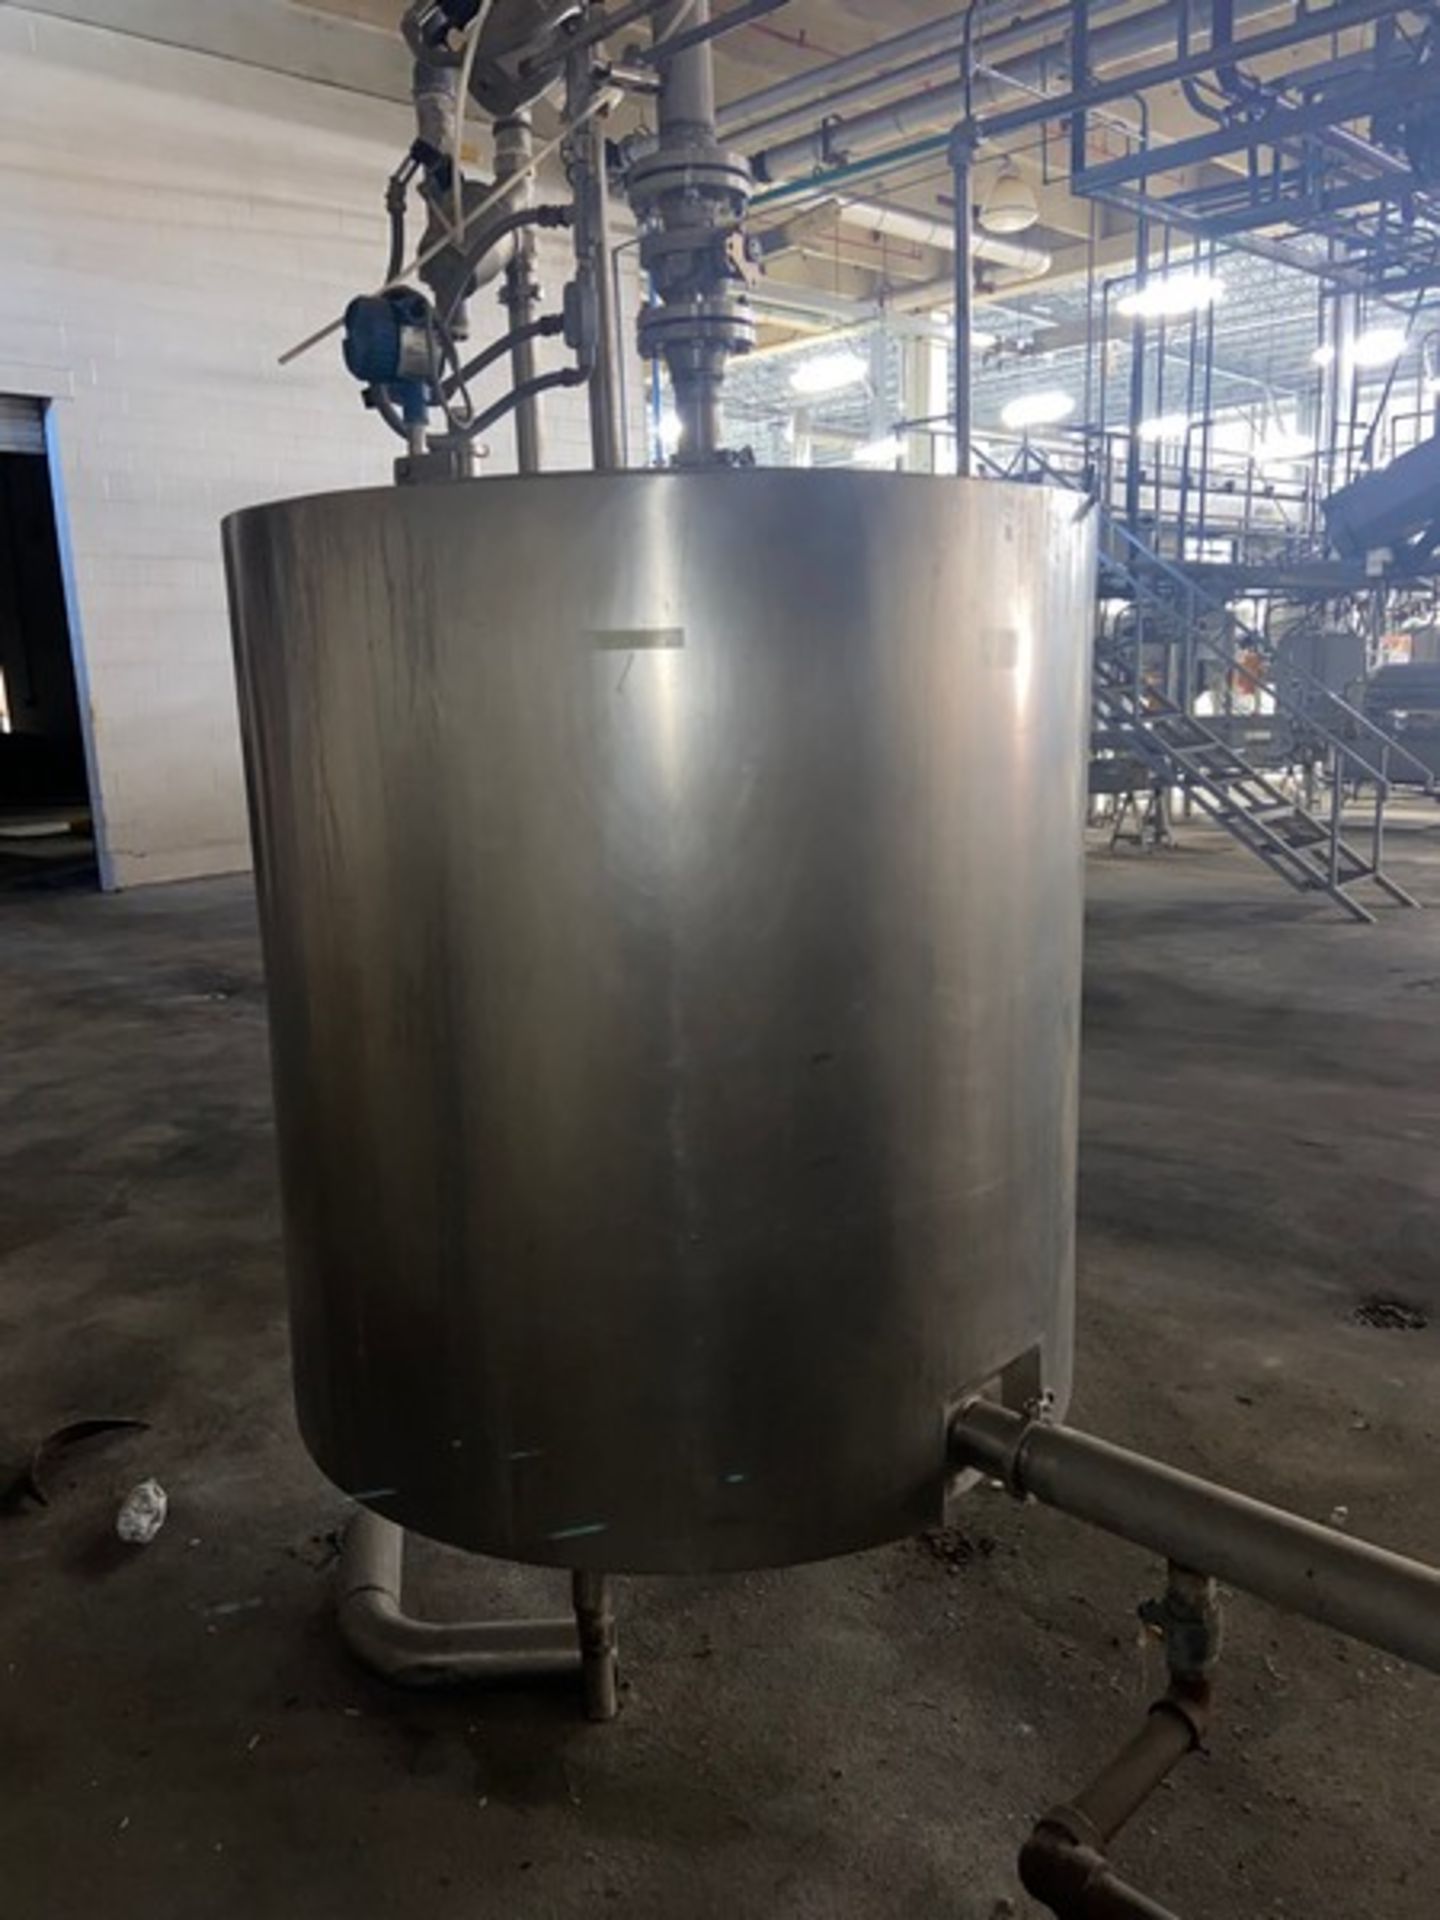 Damrow Bros. 400 Gal. S/S Vertical Insulated Tank, S/N 25609, with S/S Hinge Lid, Mounted on S/S - Image 12 of 16